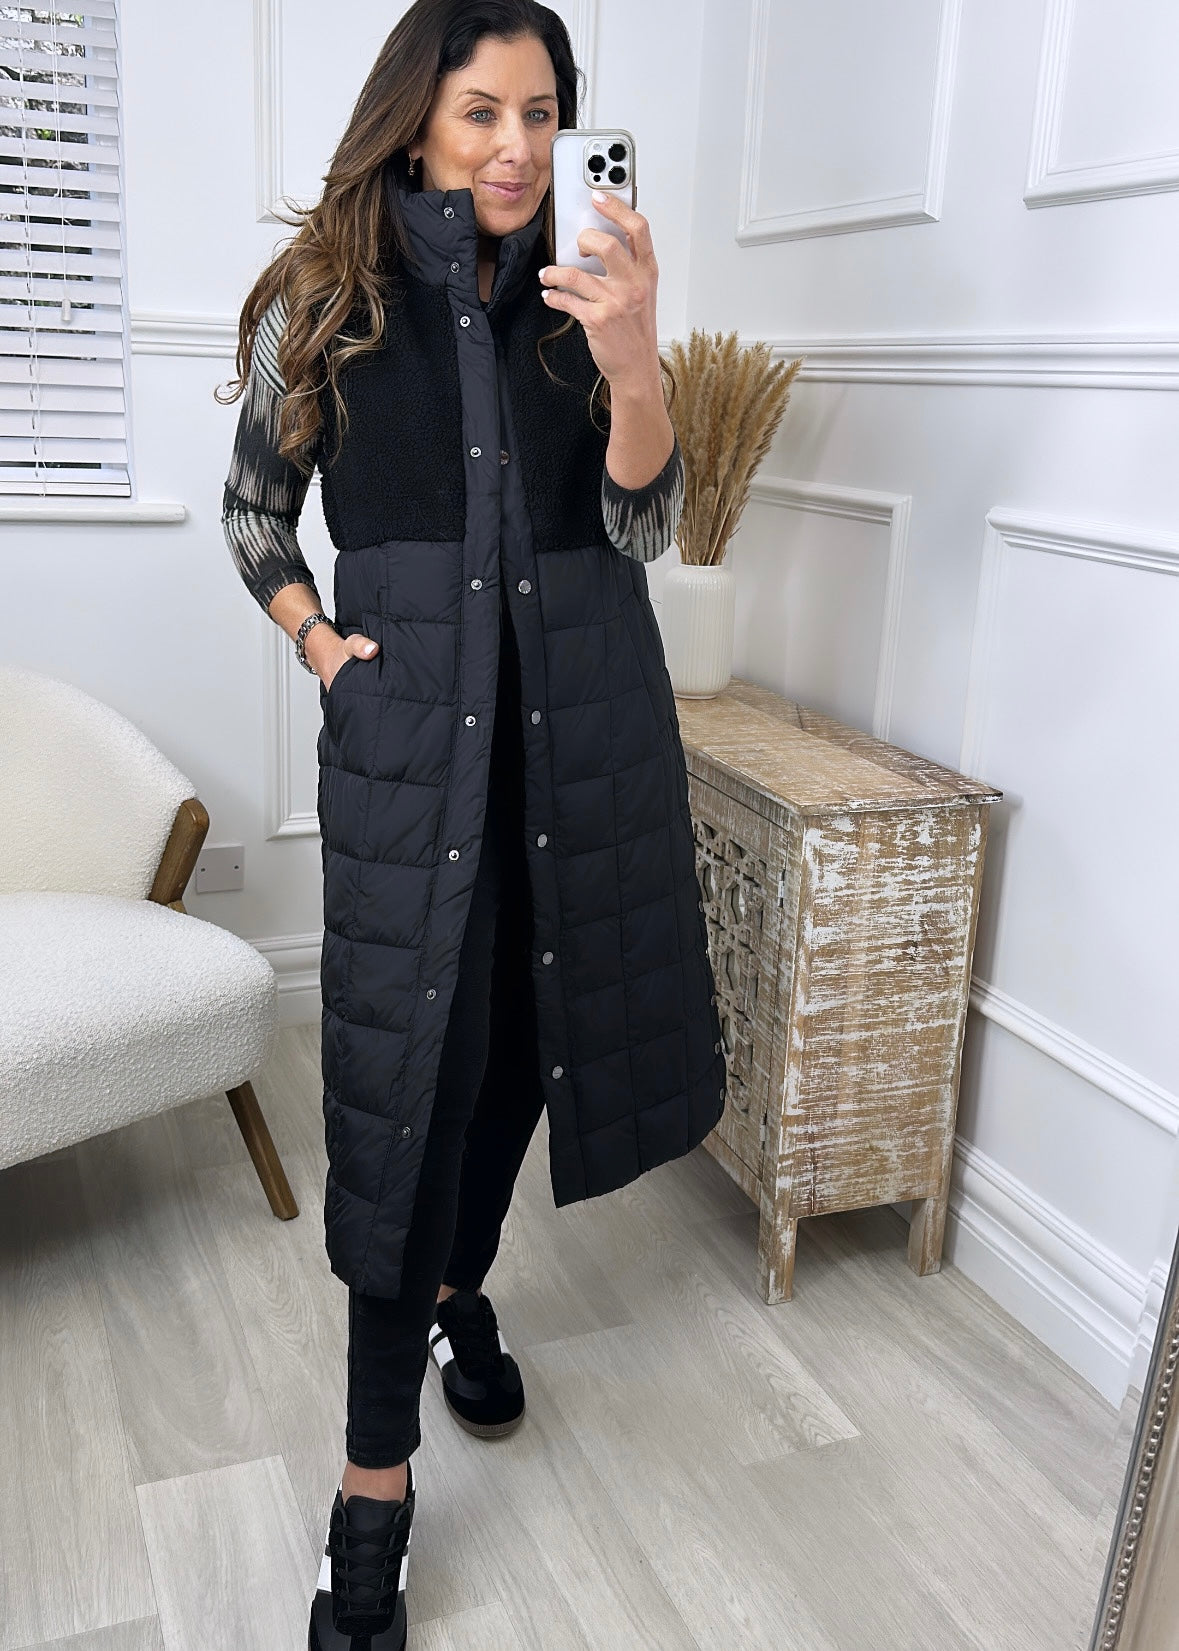 Molly Black Teddy Quilted Gilet